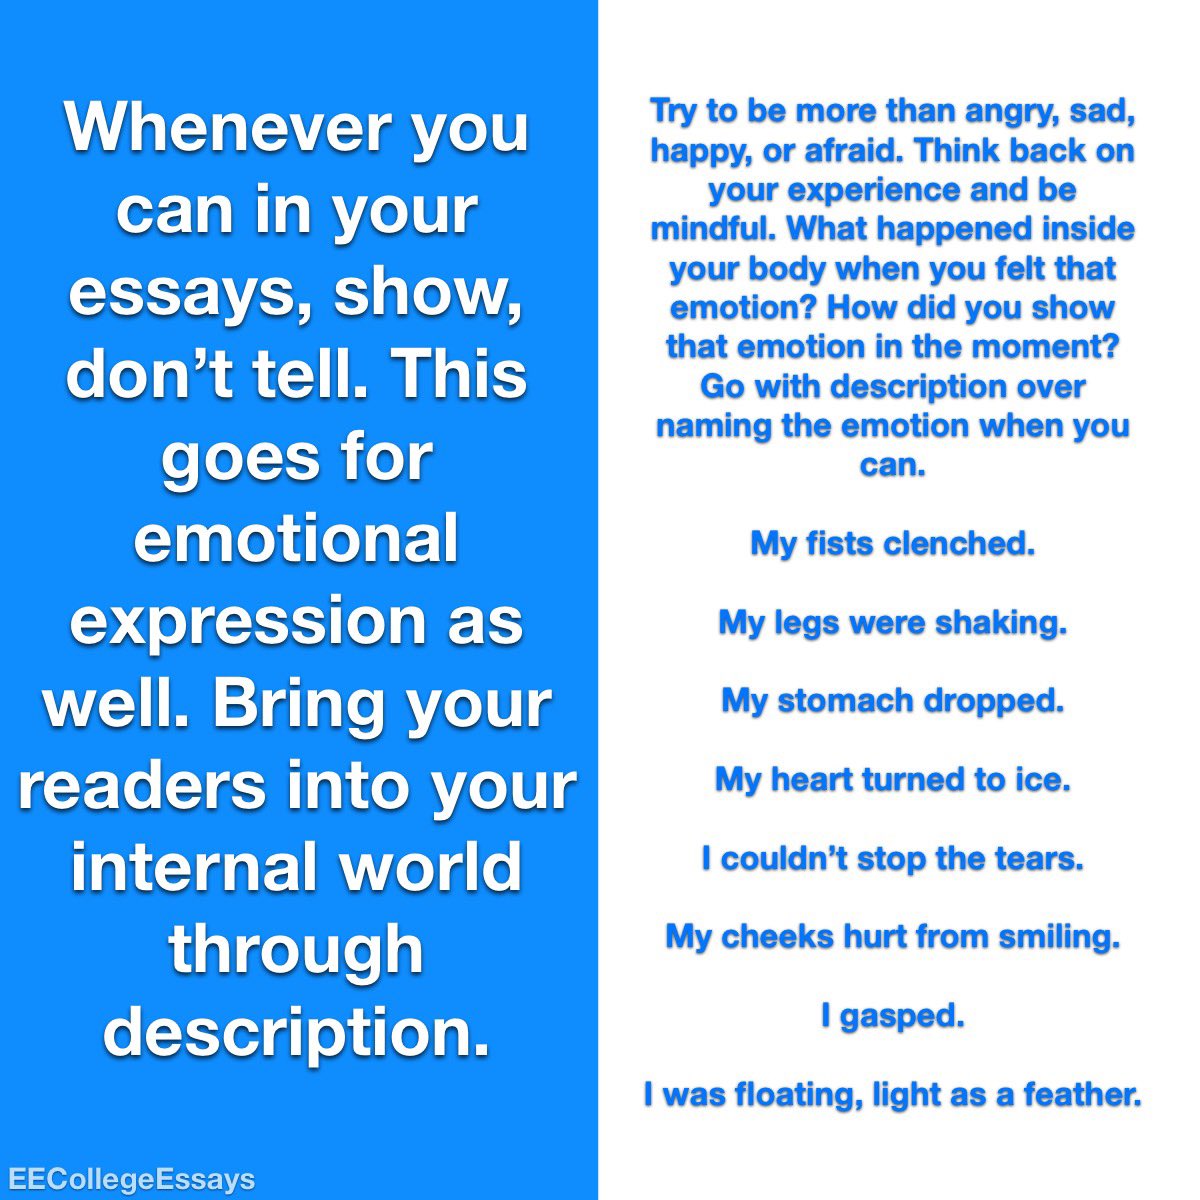 More advice on sharing emotions in your essays. You’ll see “show, don’t tell” everywhere you seek essay guidance. That maxim stands for talking about emotions as well.#collegeessays #collegeessay #essaycoach #applicationessays #collegeapplications #showdonttell